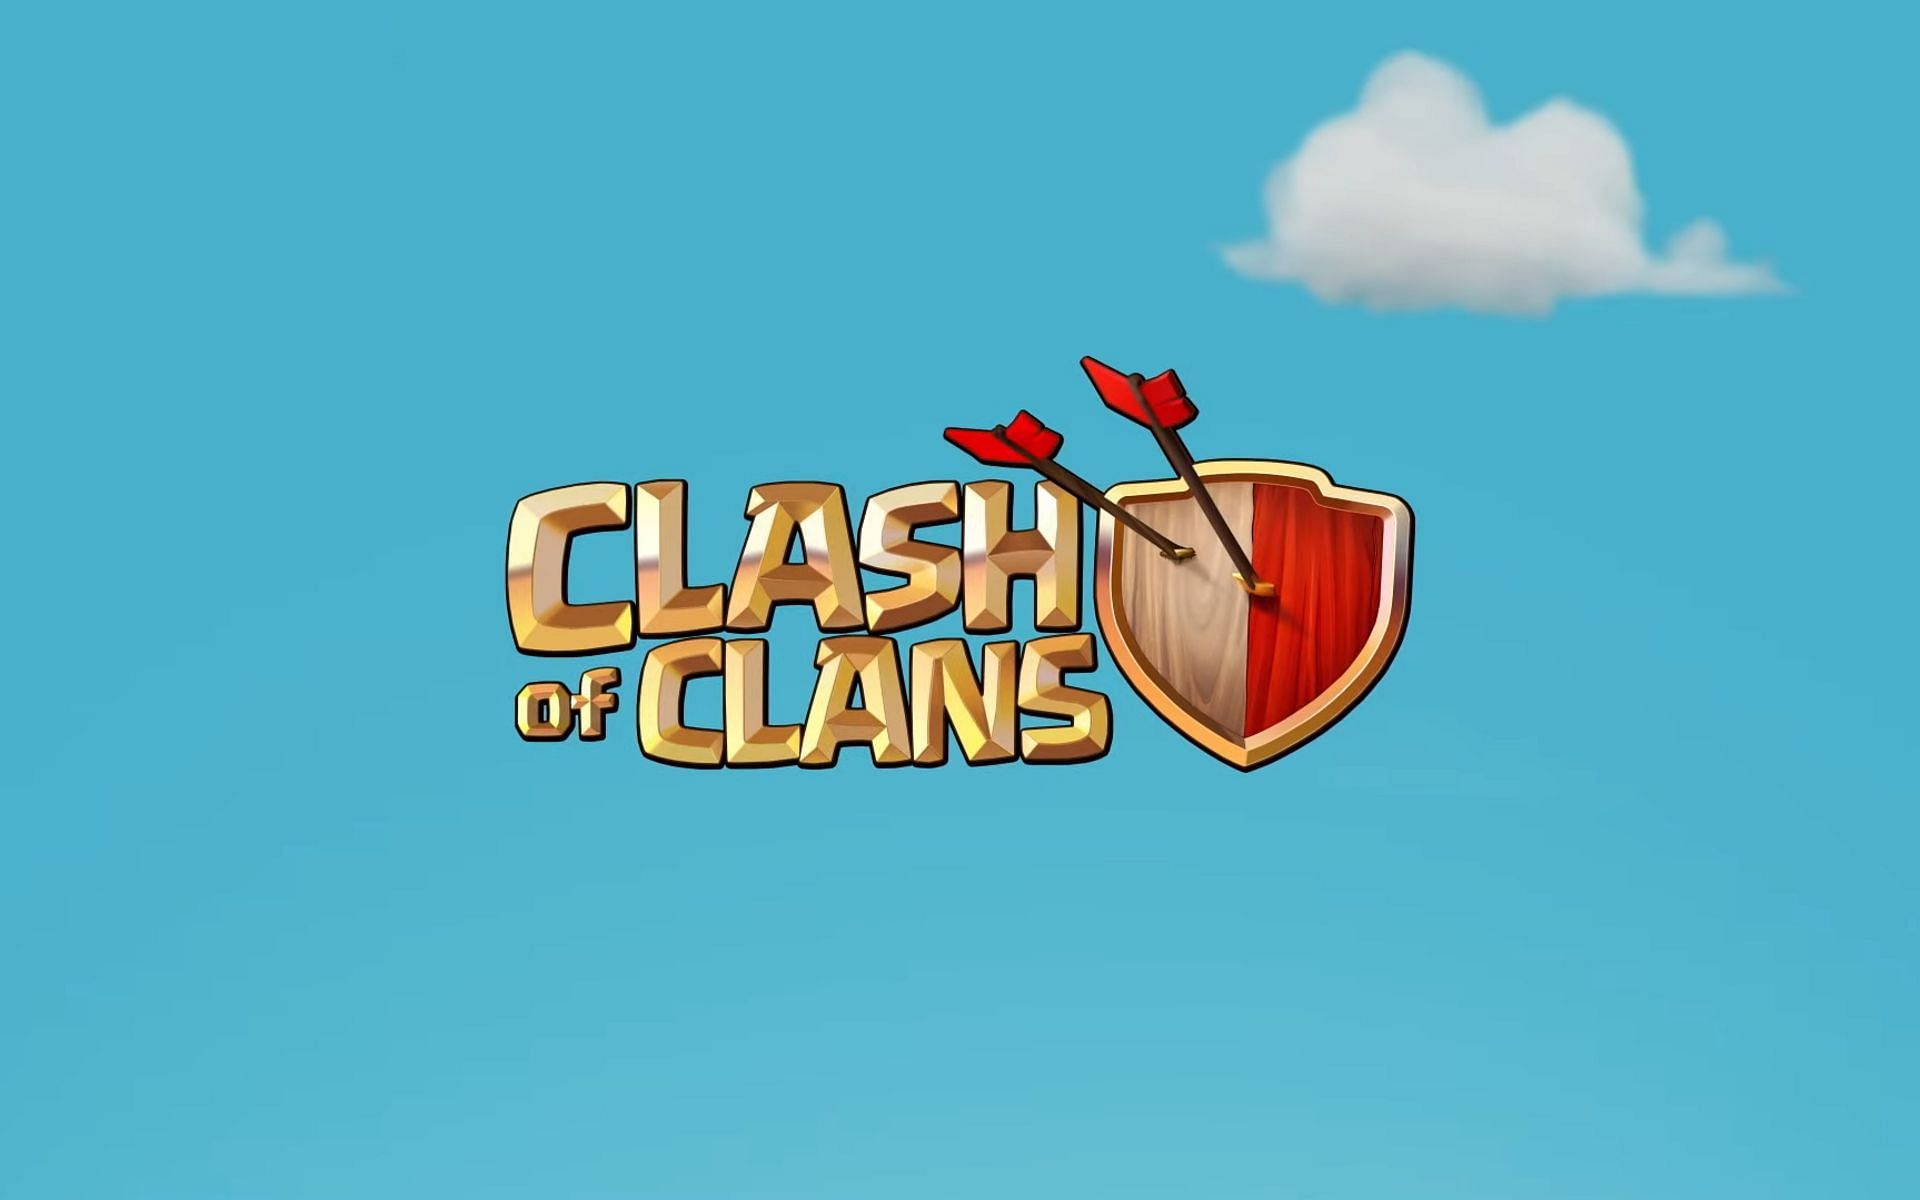 When is the next Clash of Clans update in October 2022?